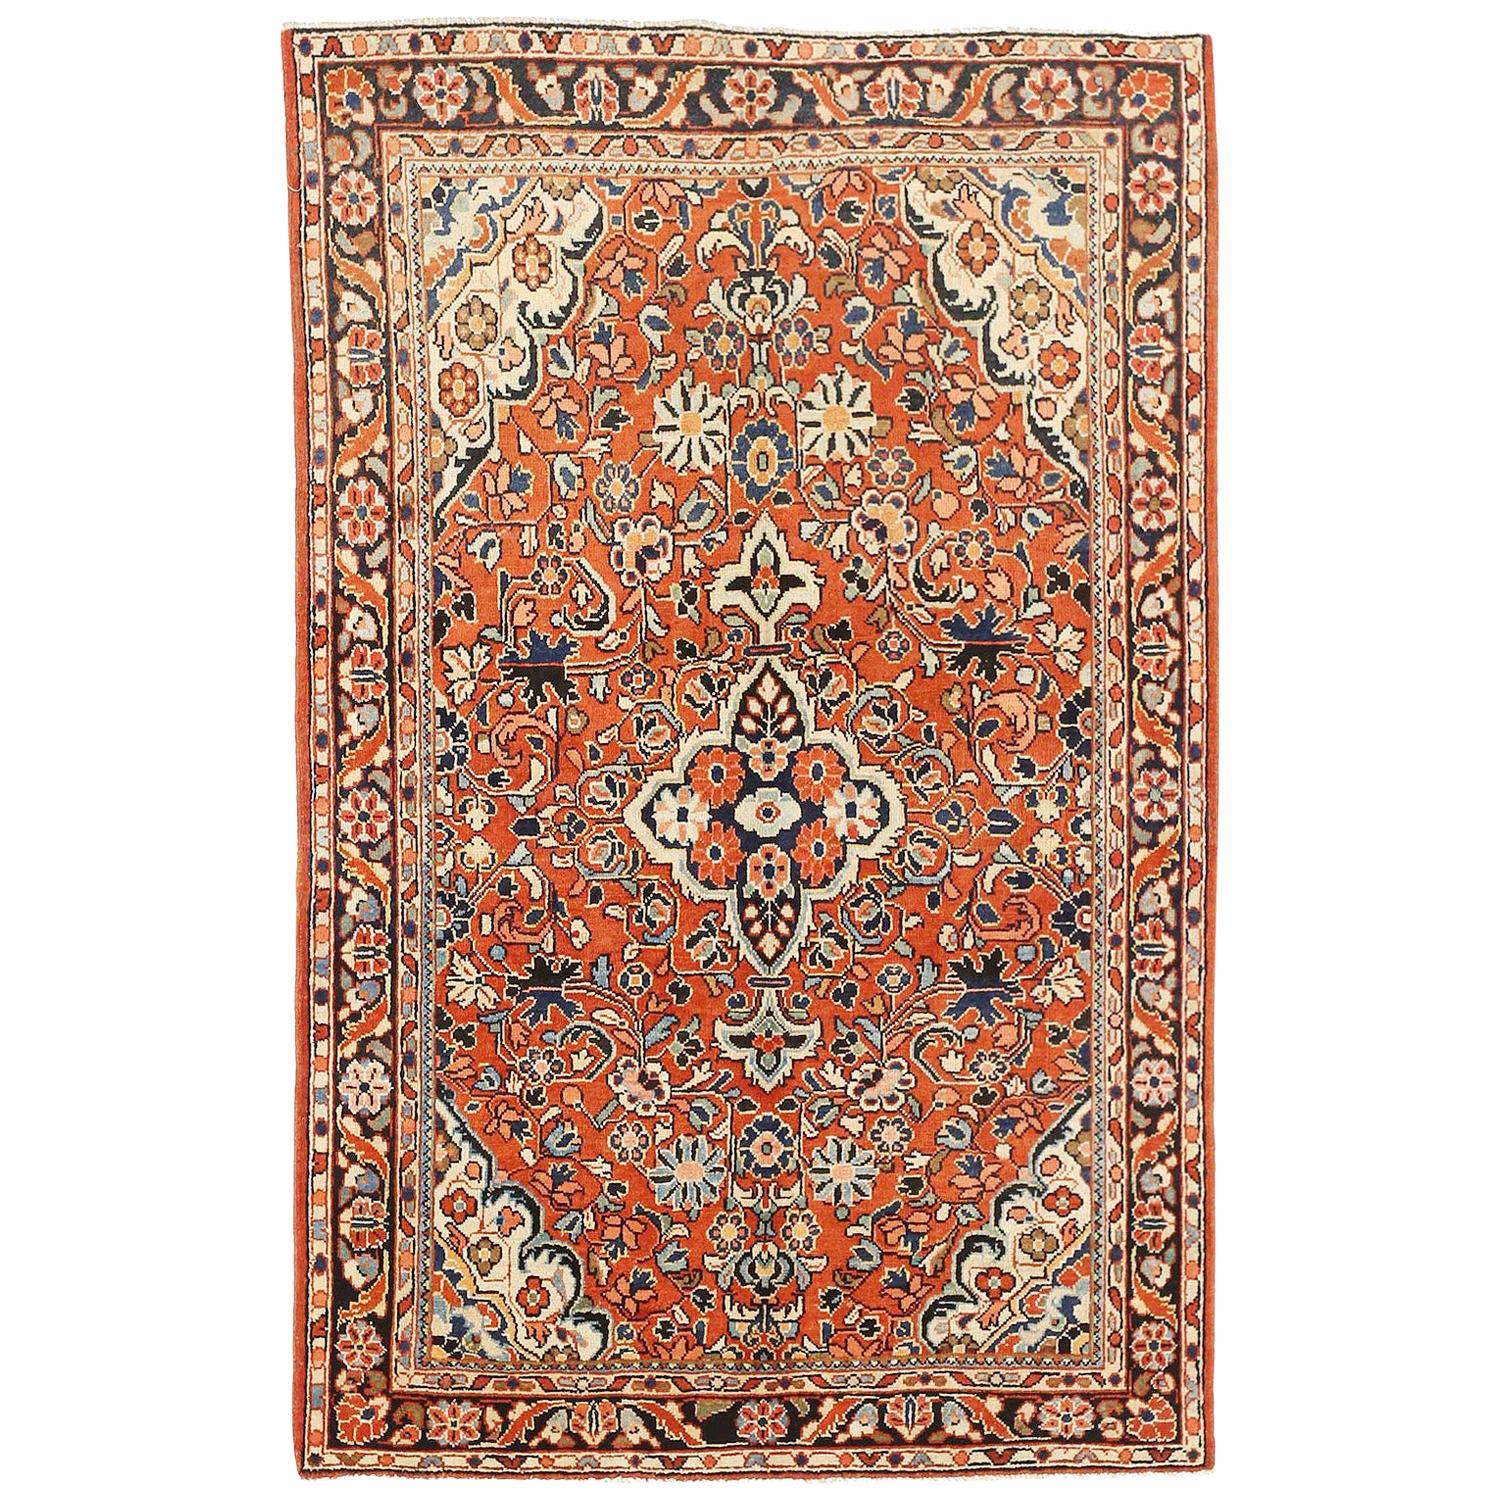 Antique Persian Mahal Rug with Blue and White Floral Details on Rust Field